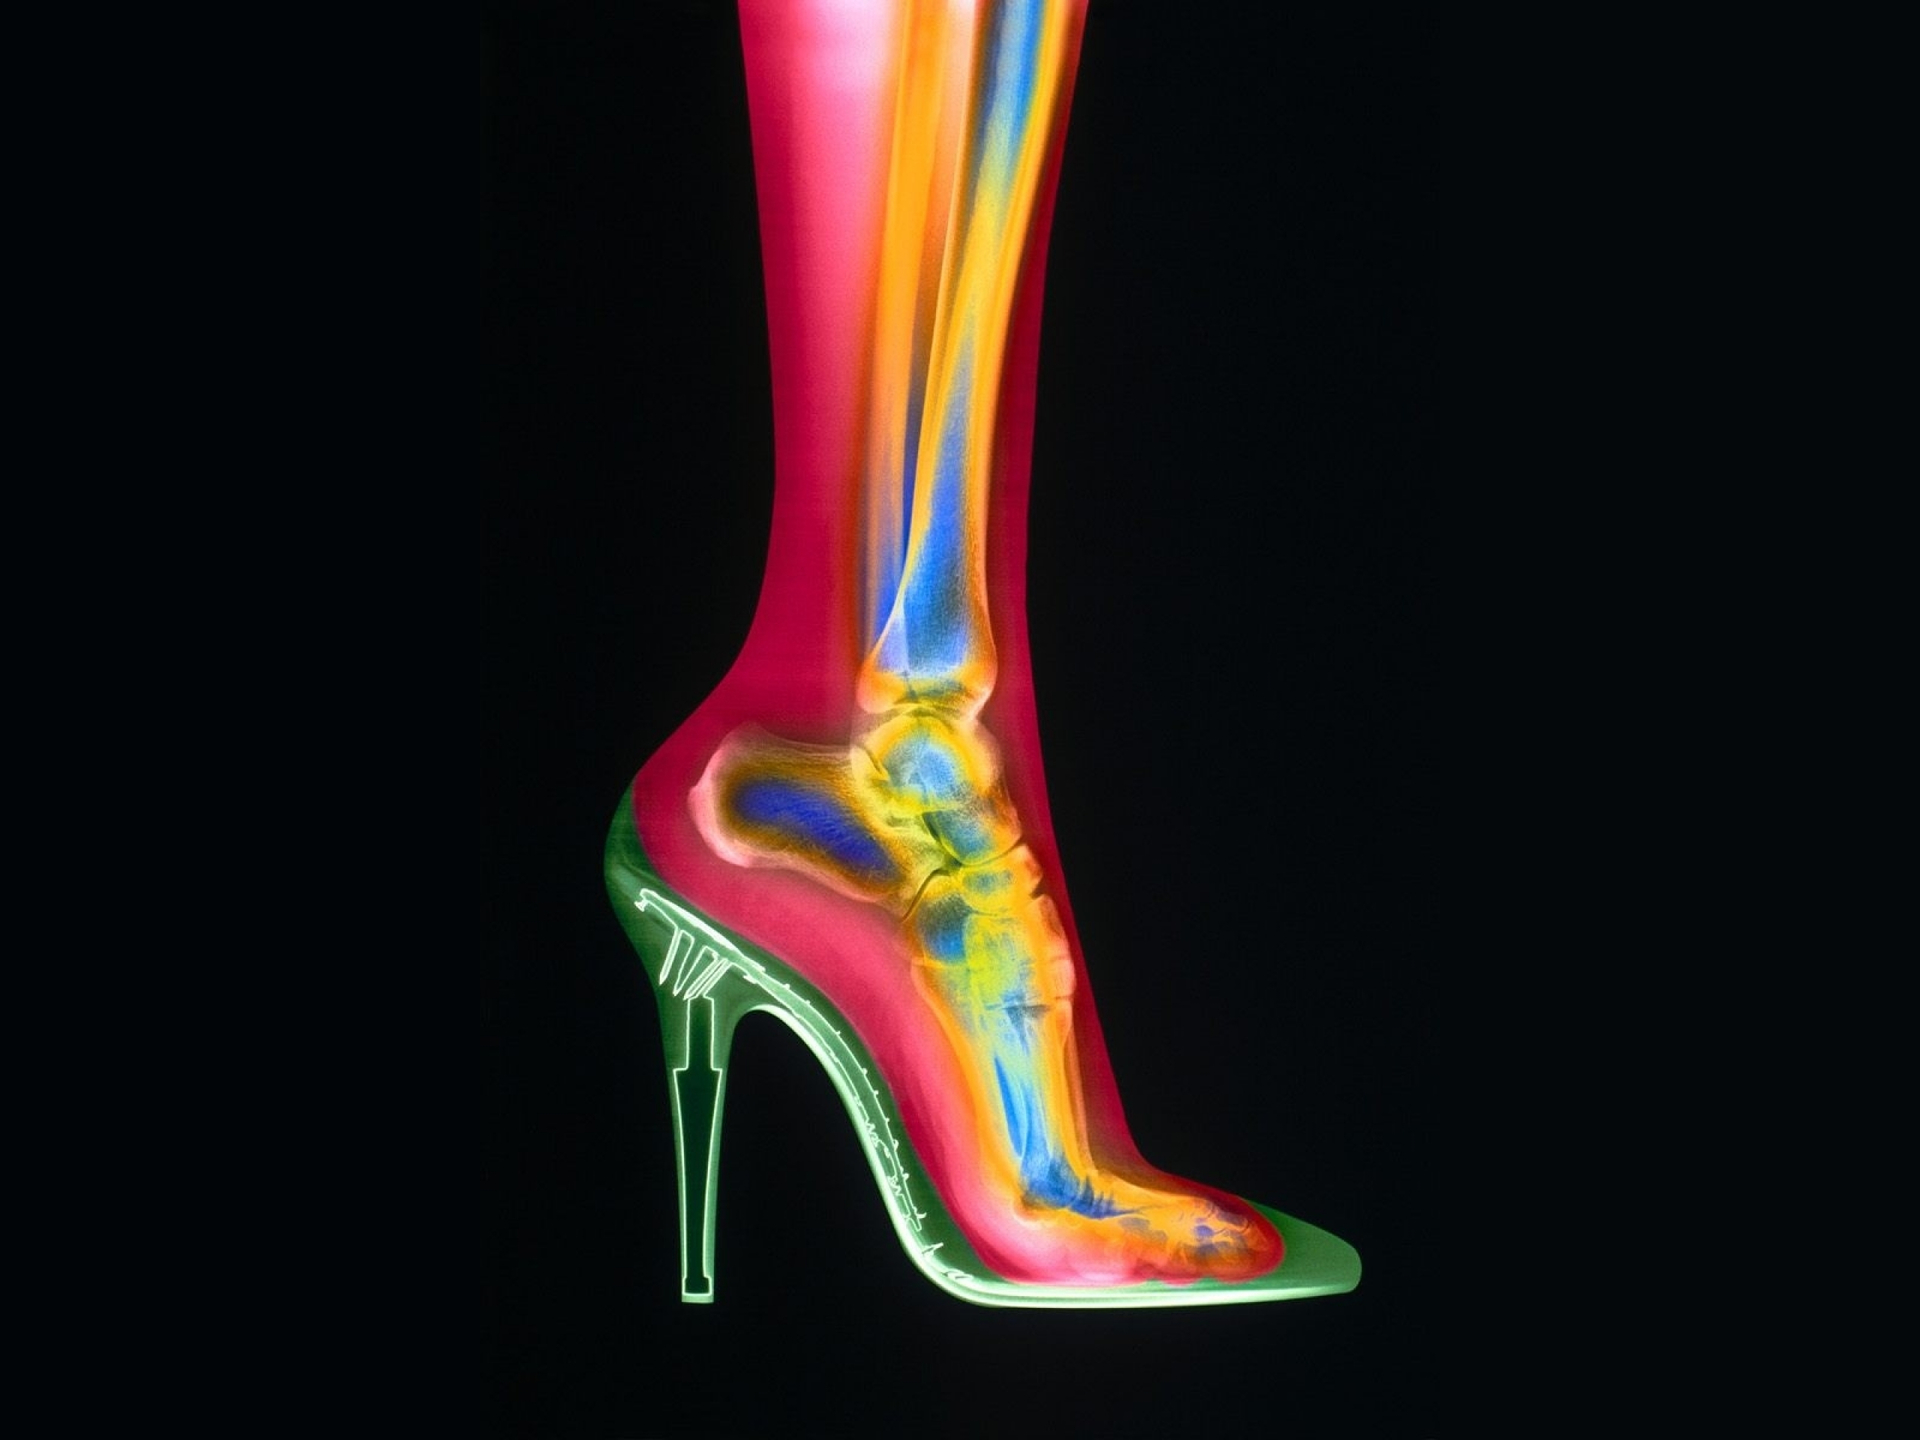 X-ray high heel shoe photography with a leg visible.